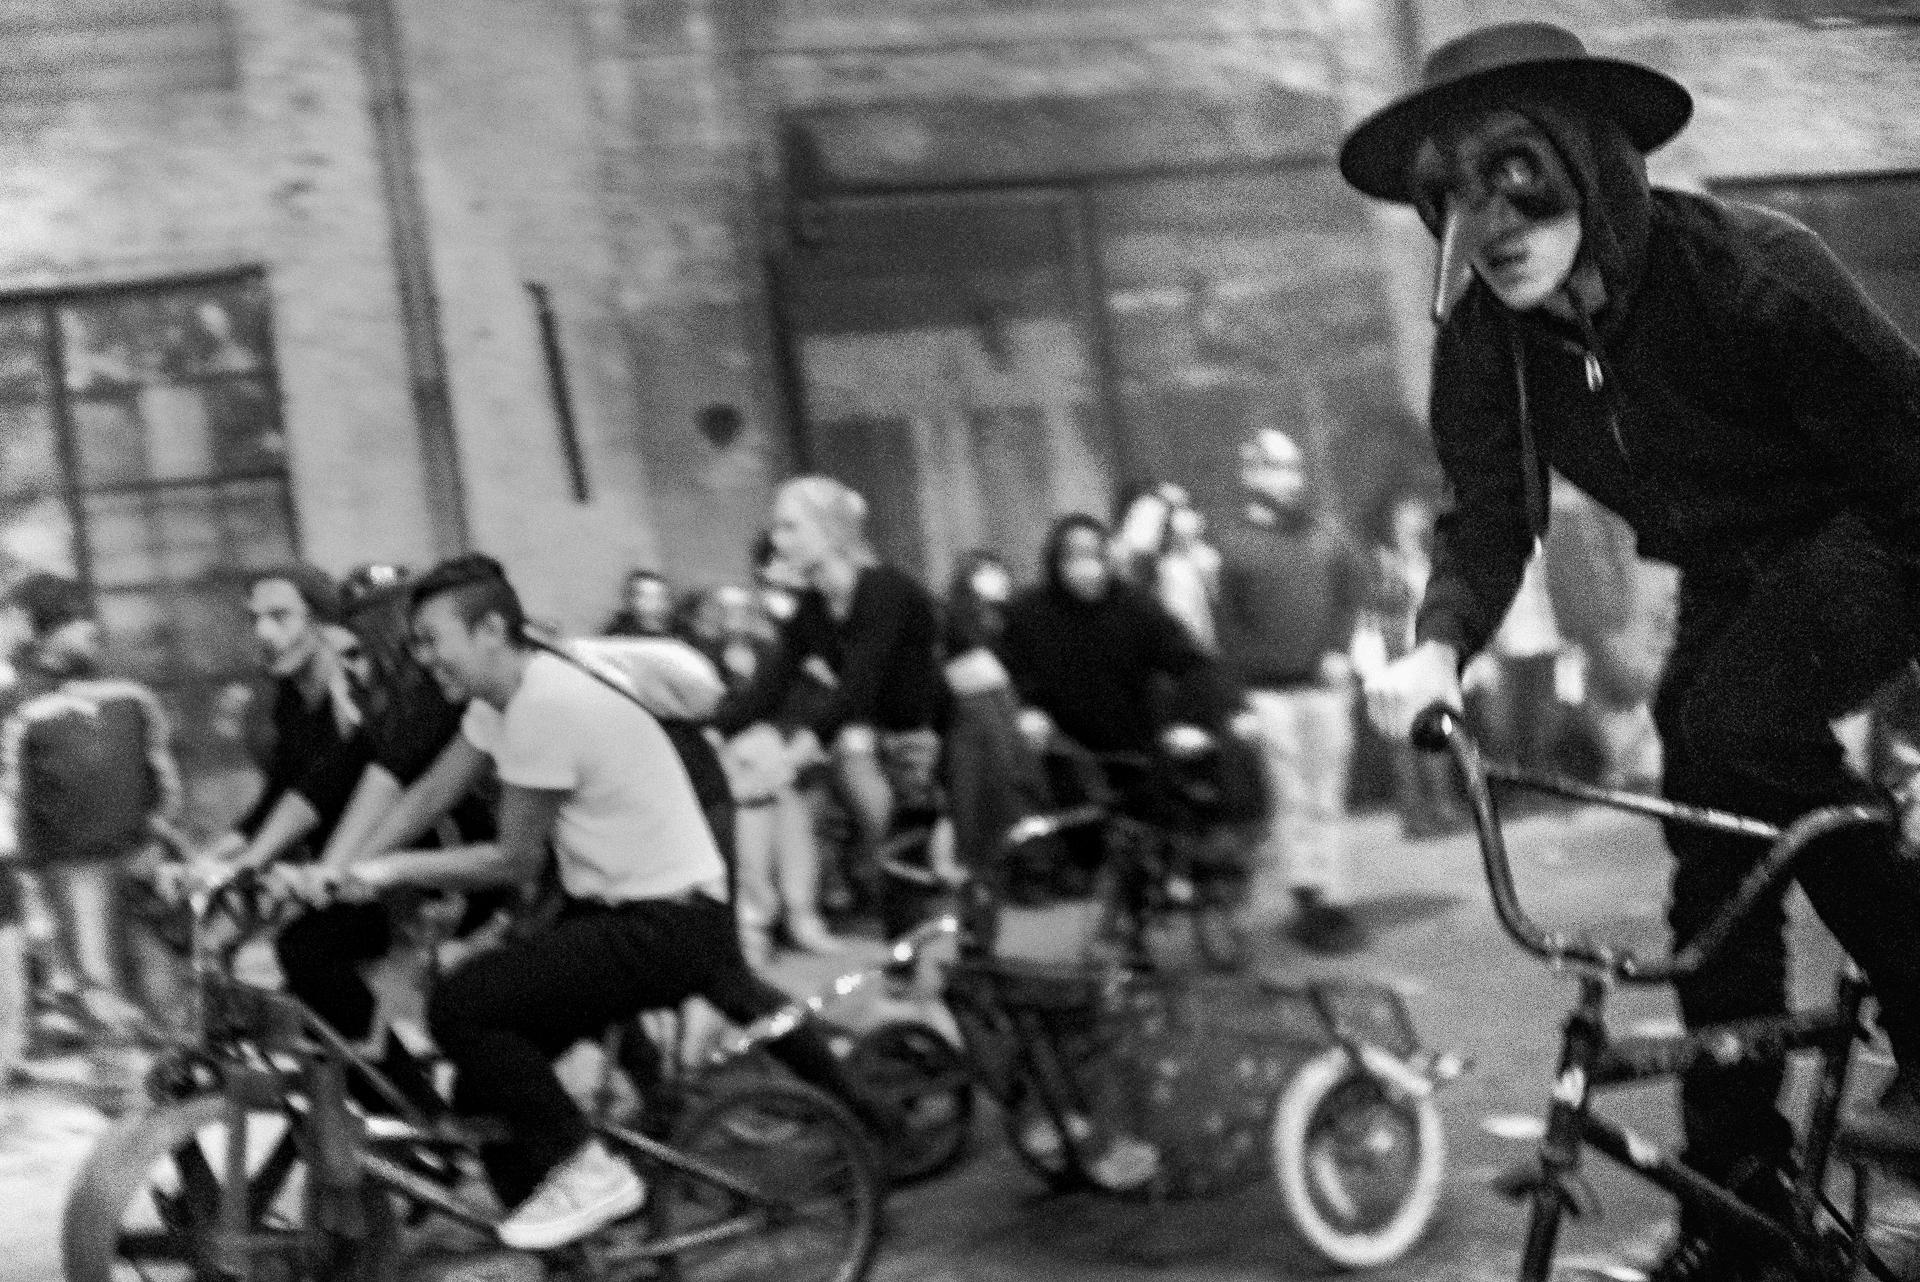 Bicycle Dystopia - Noir Black & White Photography